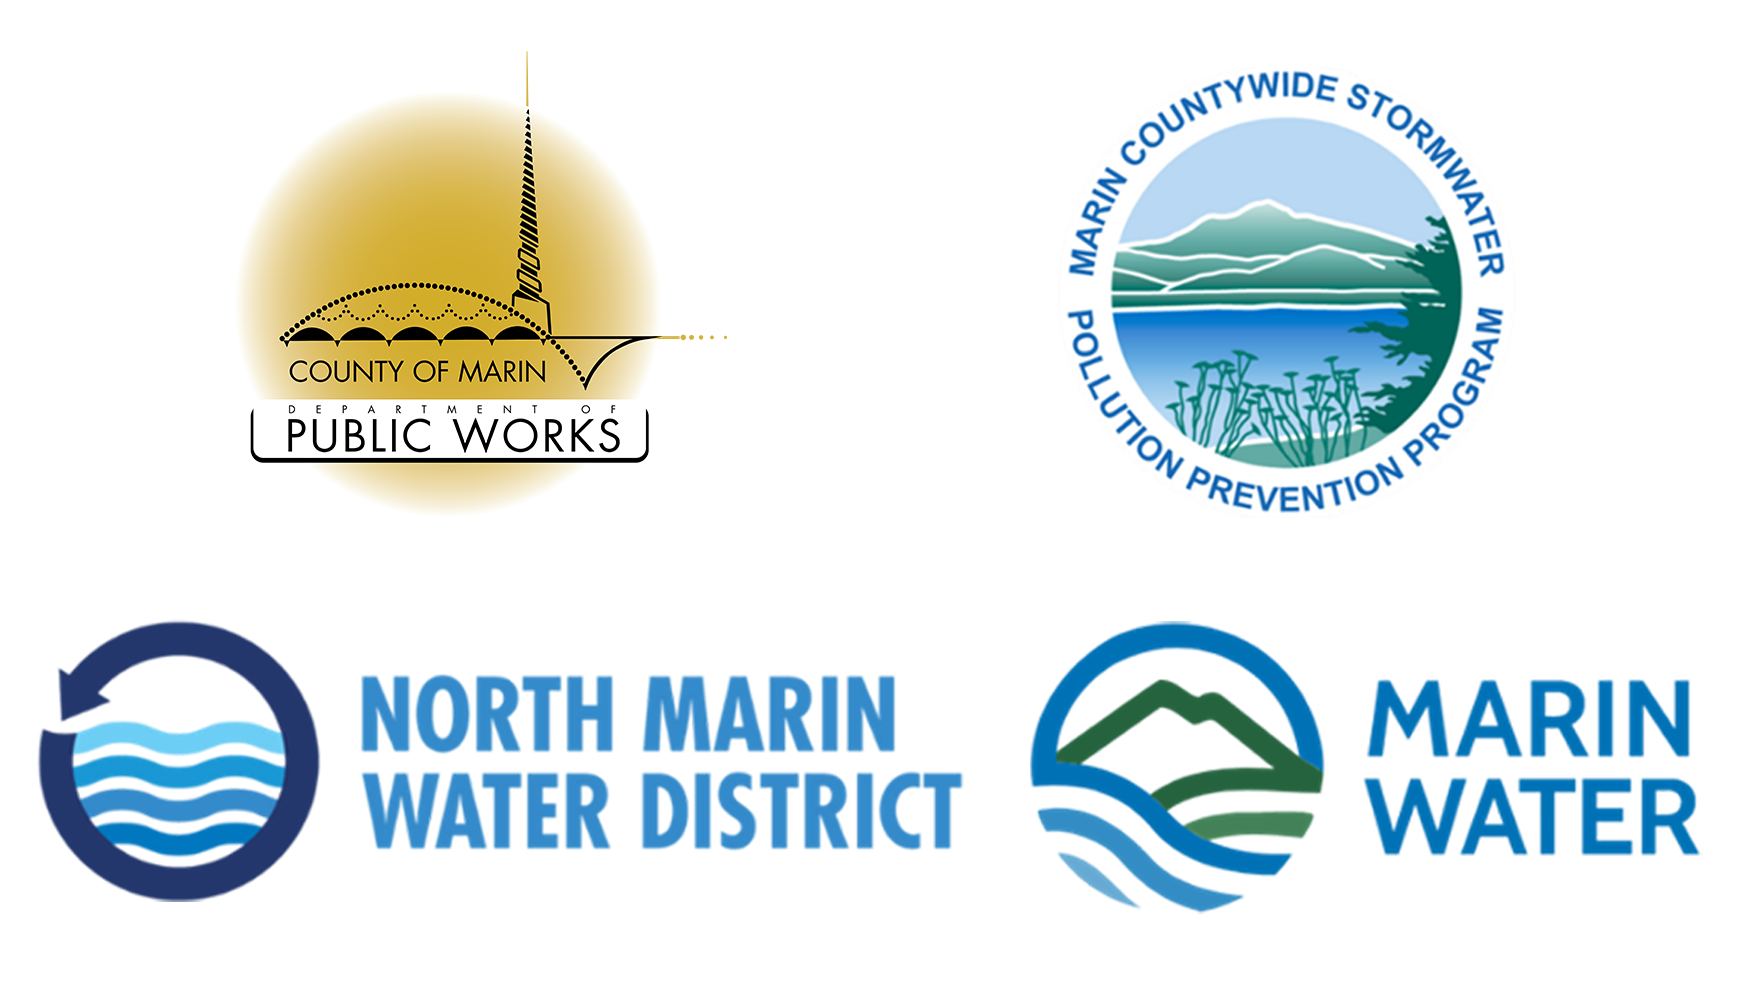 Collection of 4 logos: Marin County Public Works, MCSTOPPP, North Marin Water District, and Marin Water, all on a white background.